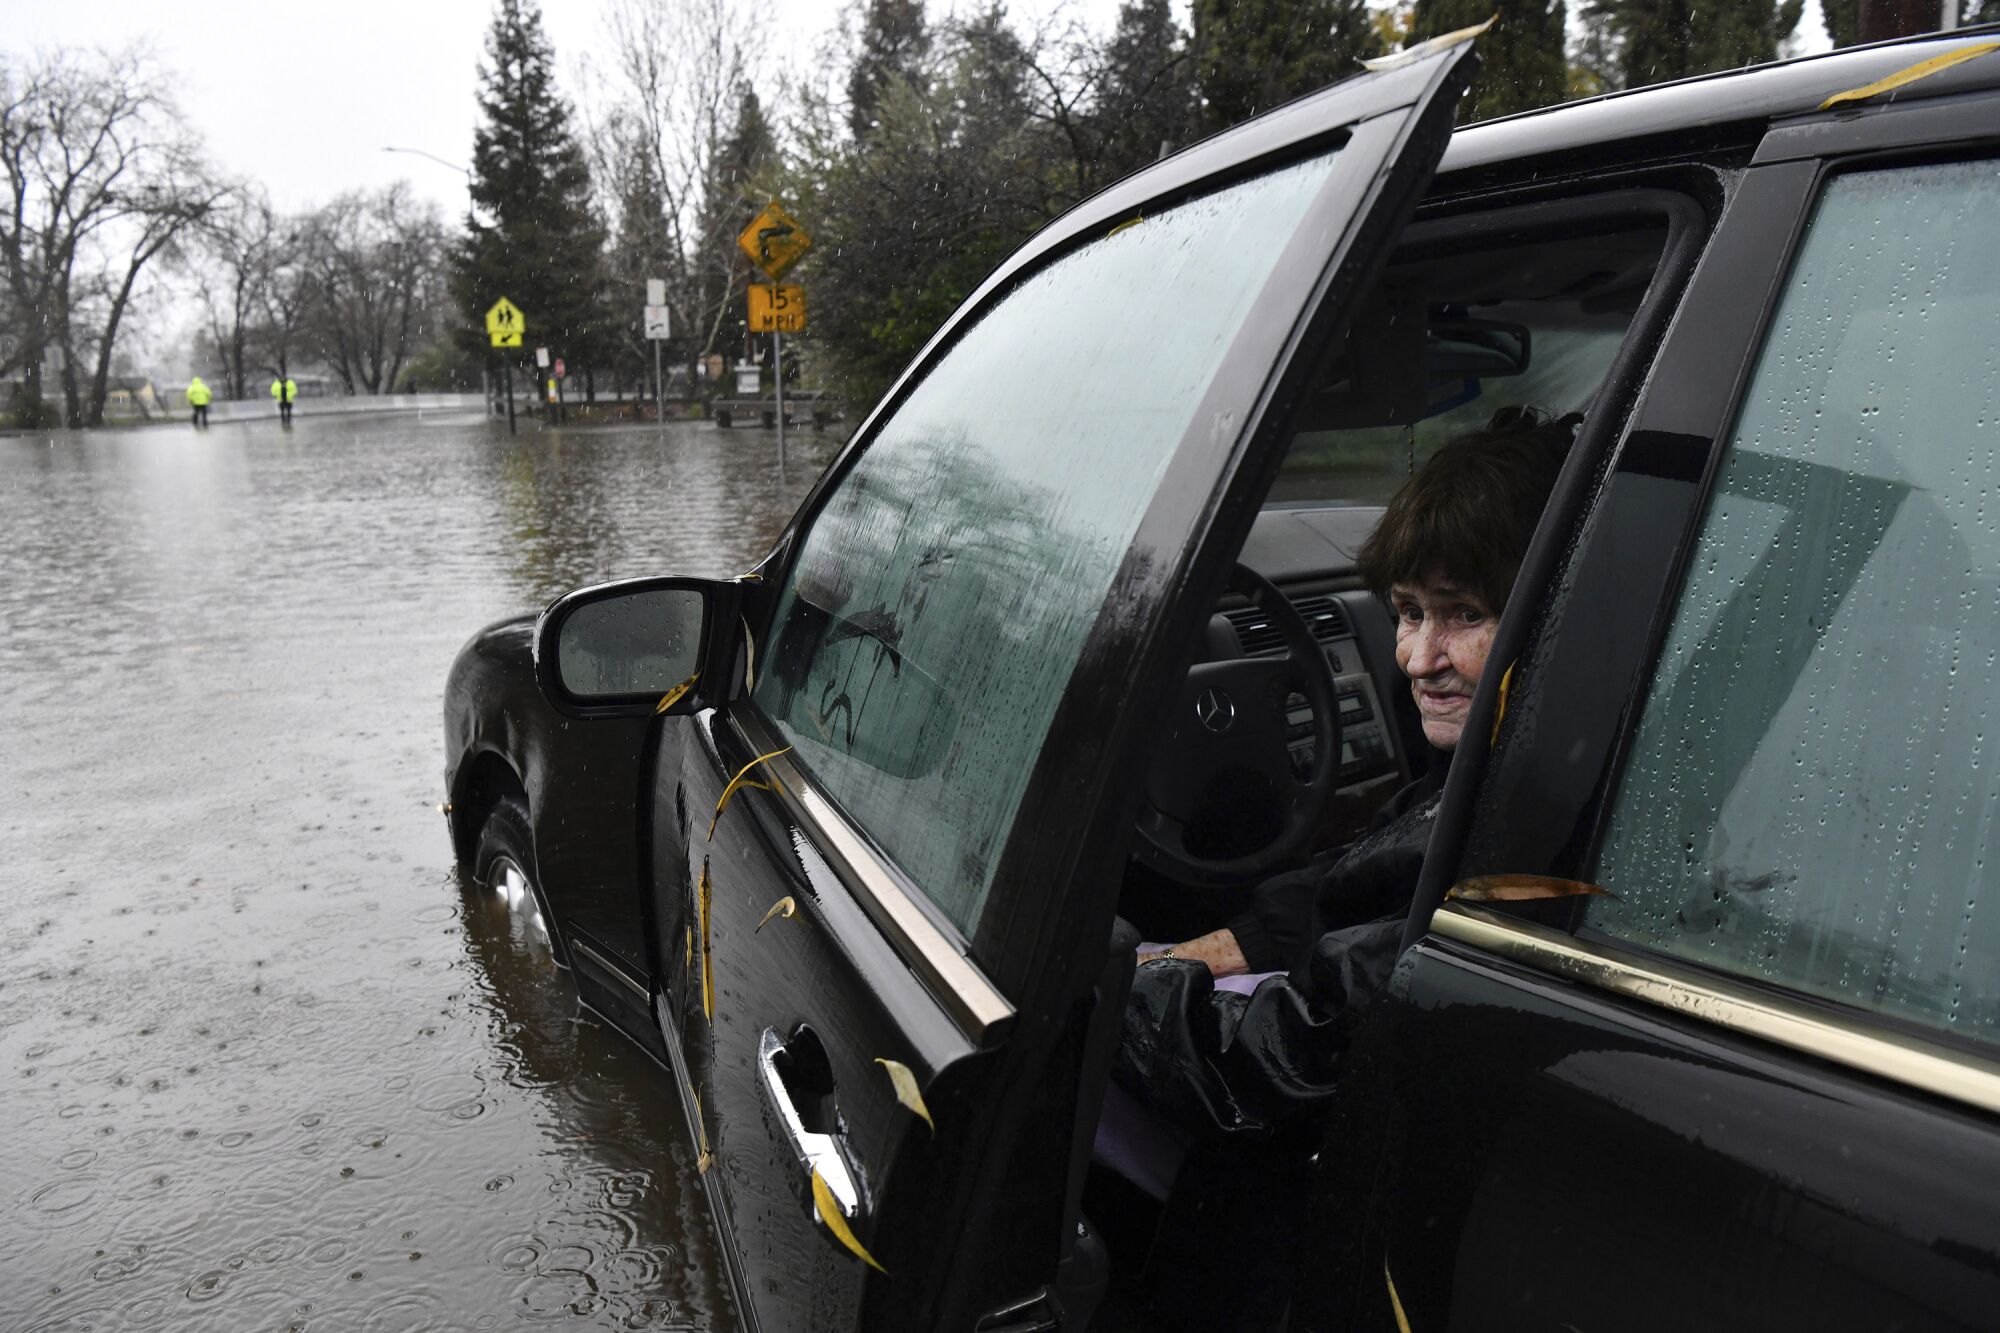 A woman looks out the open door of her car as it sits in a flooded area.